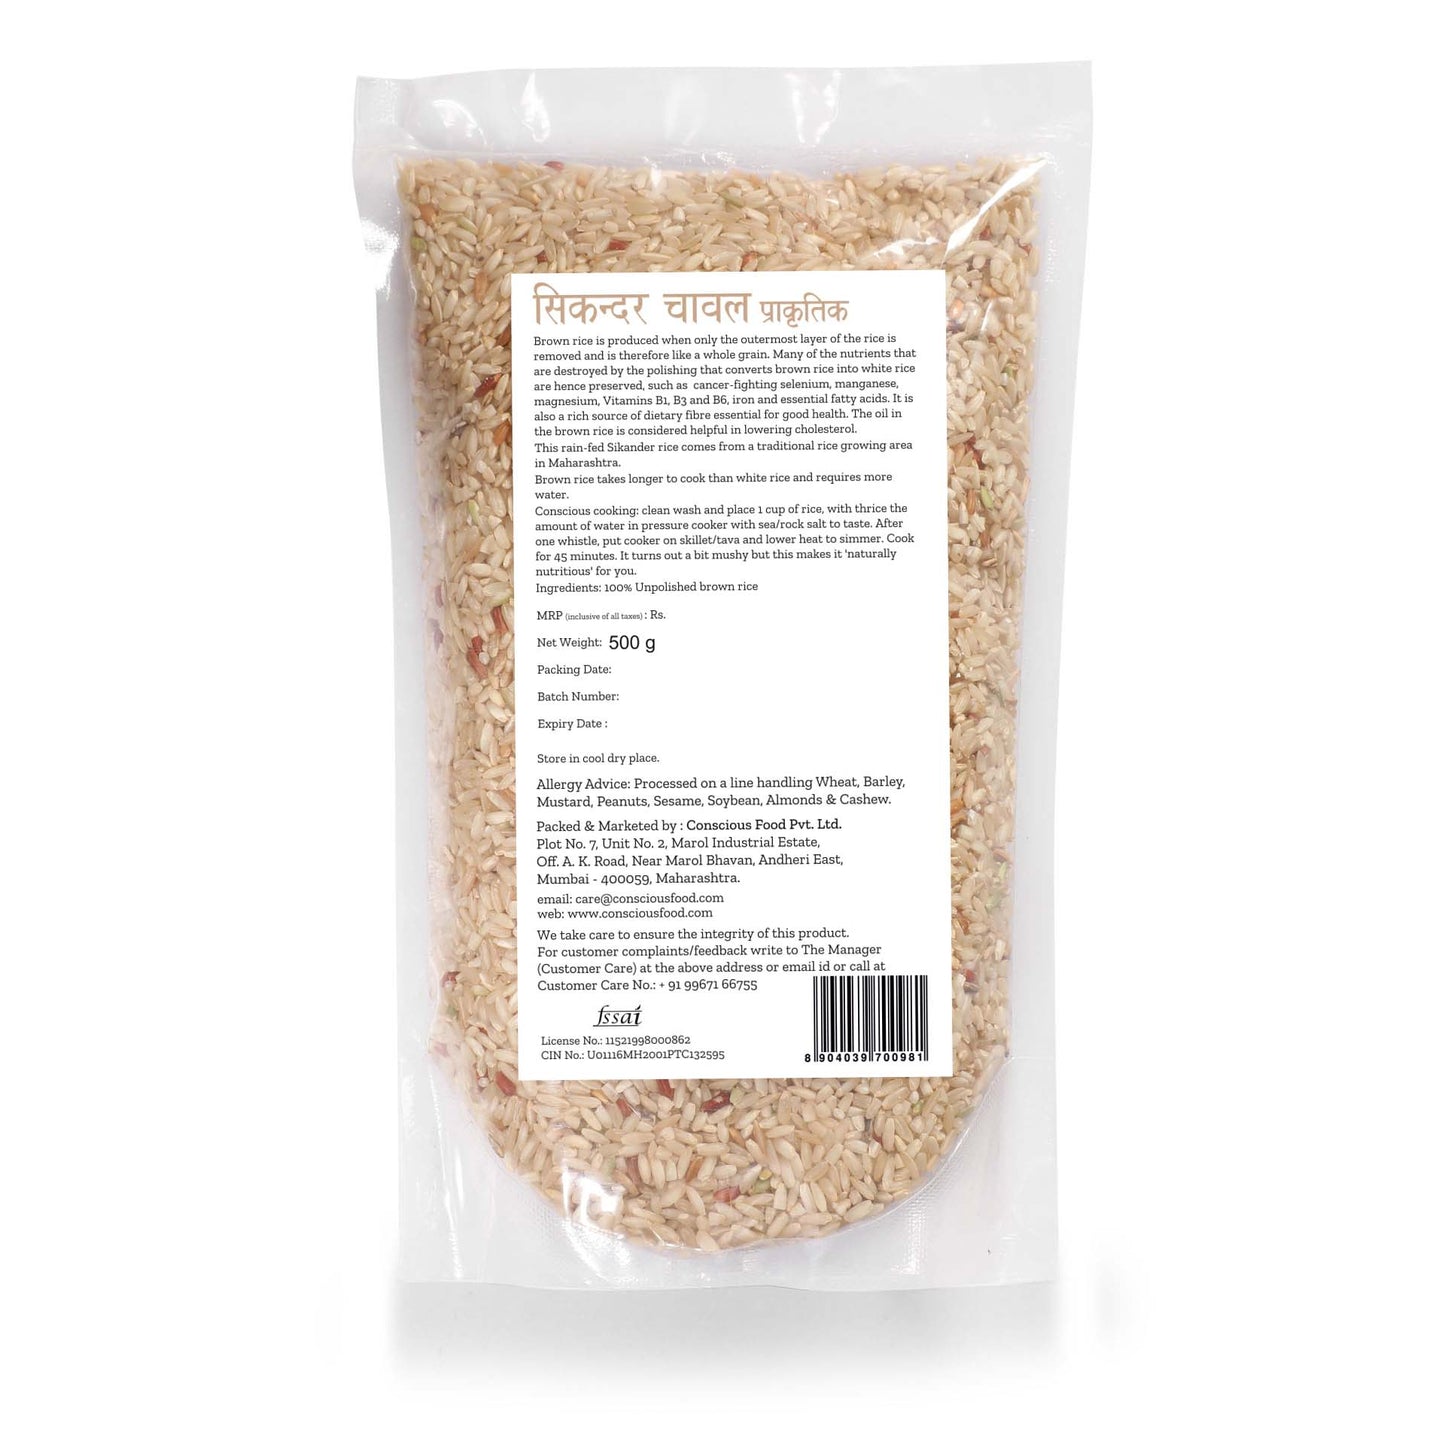 
                  
                    Conscious Food Brown Rice (Sikander) - 500g
                  
                